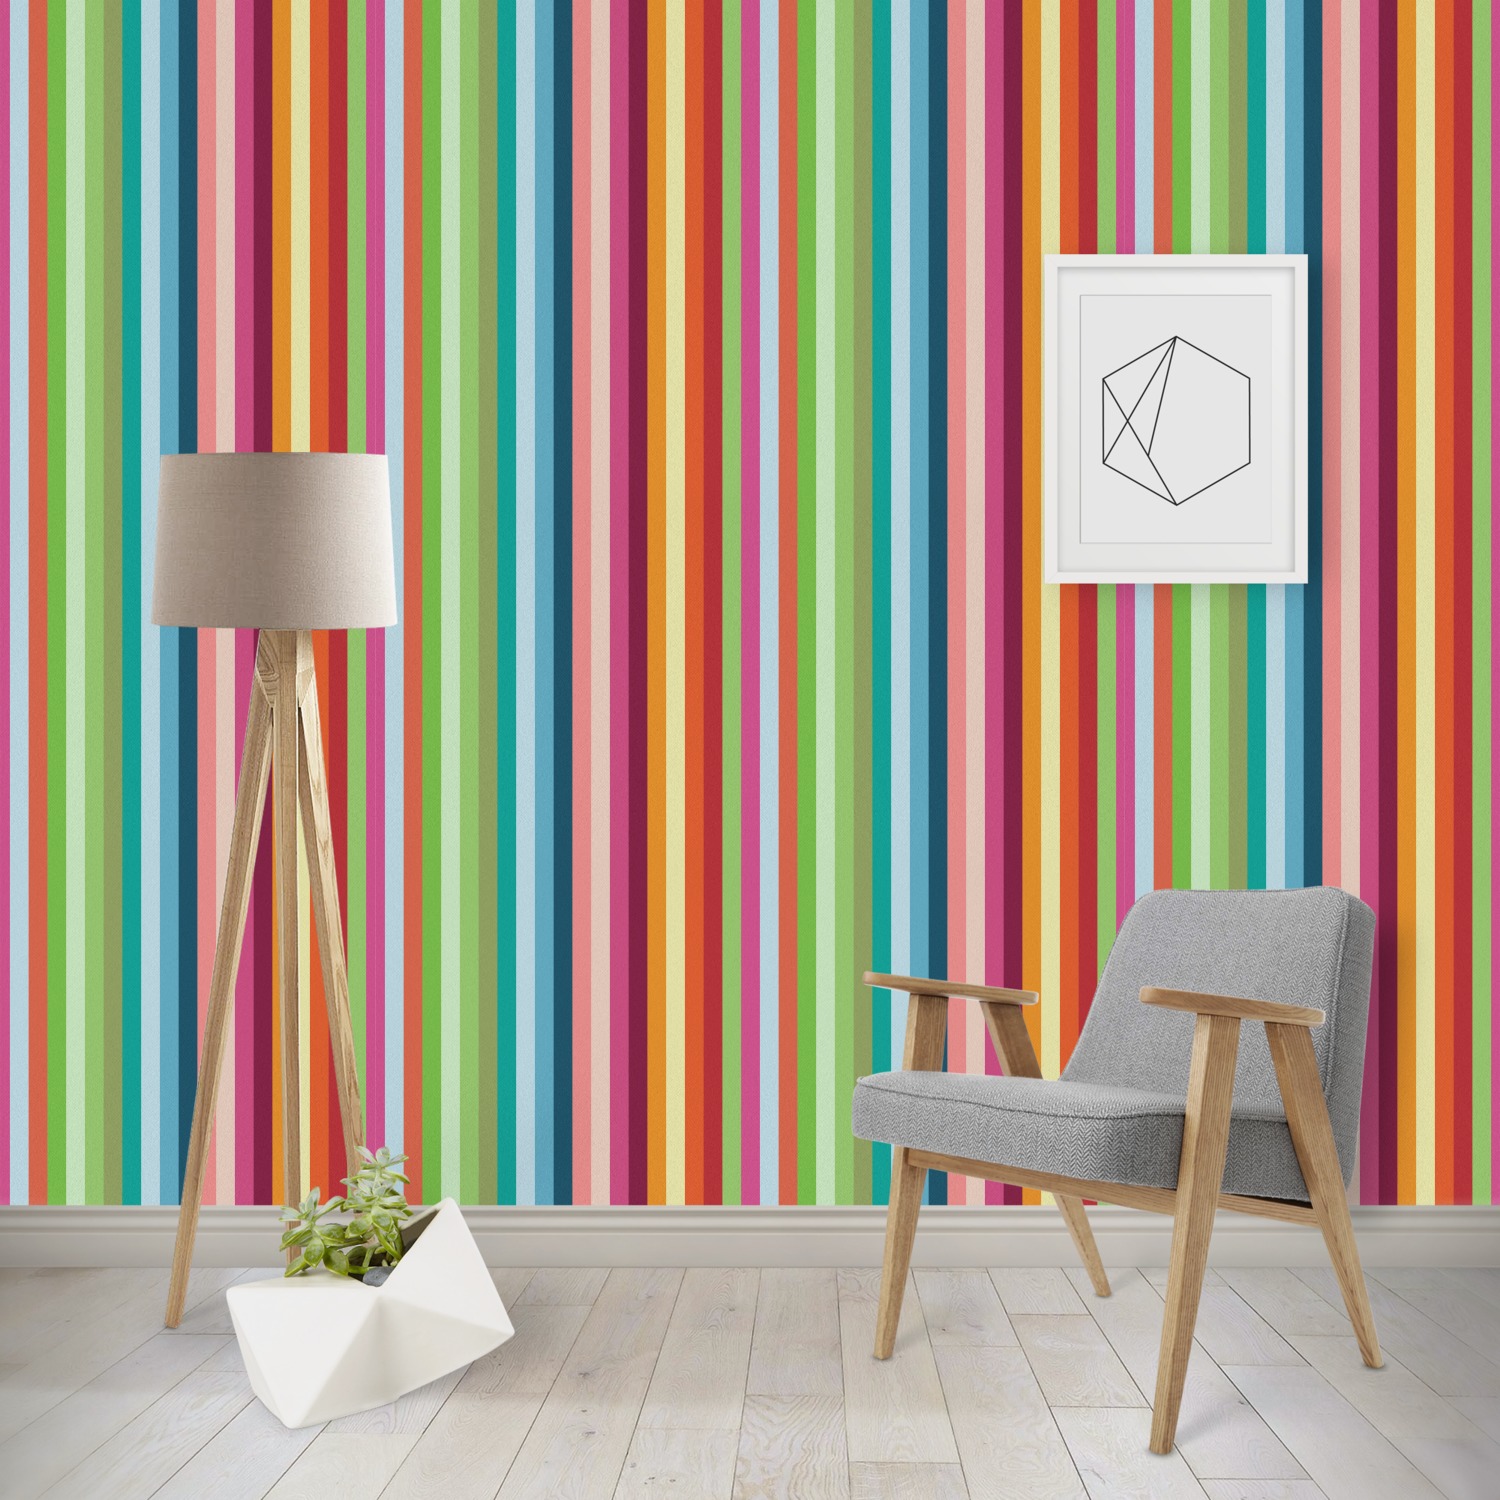 Vertical striped Wallpaper - Peel and Stick or Non-Pasted